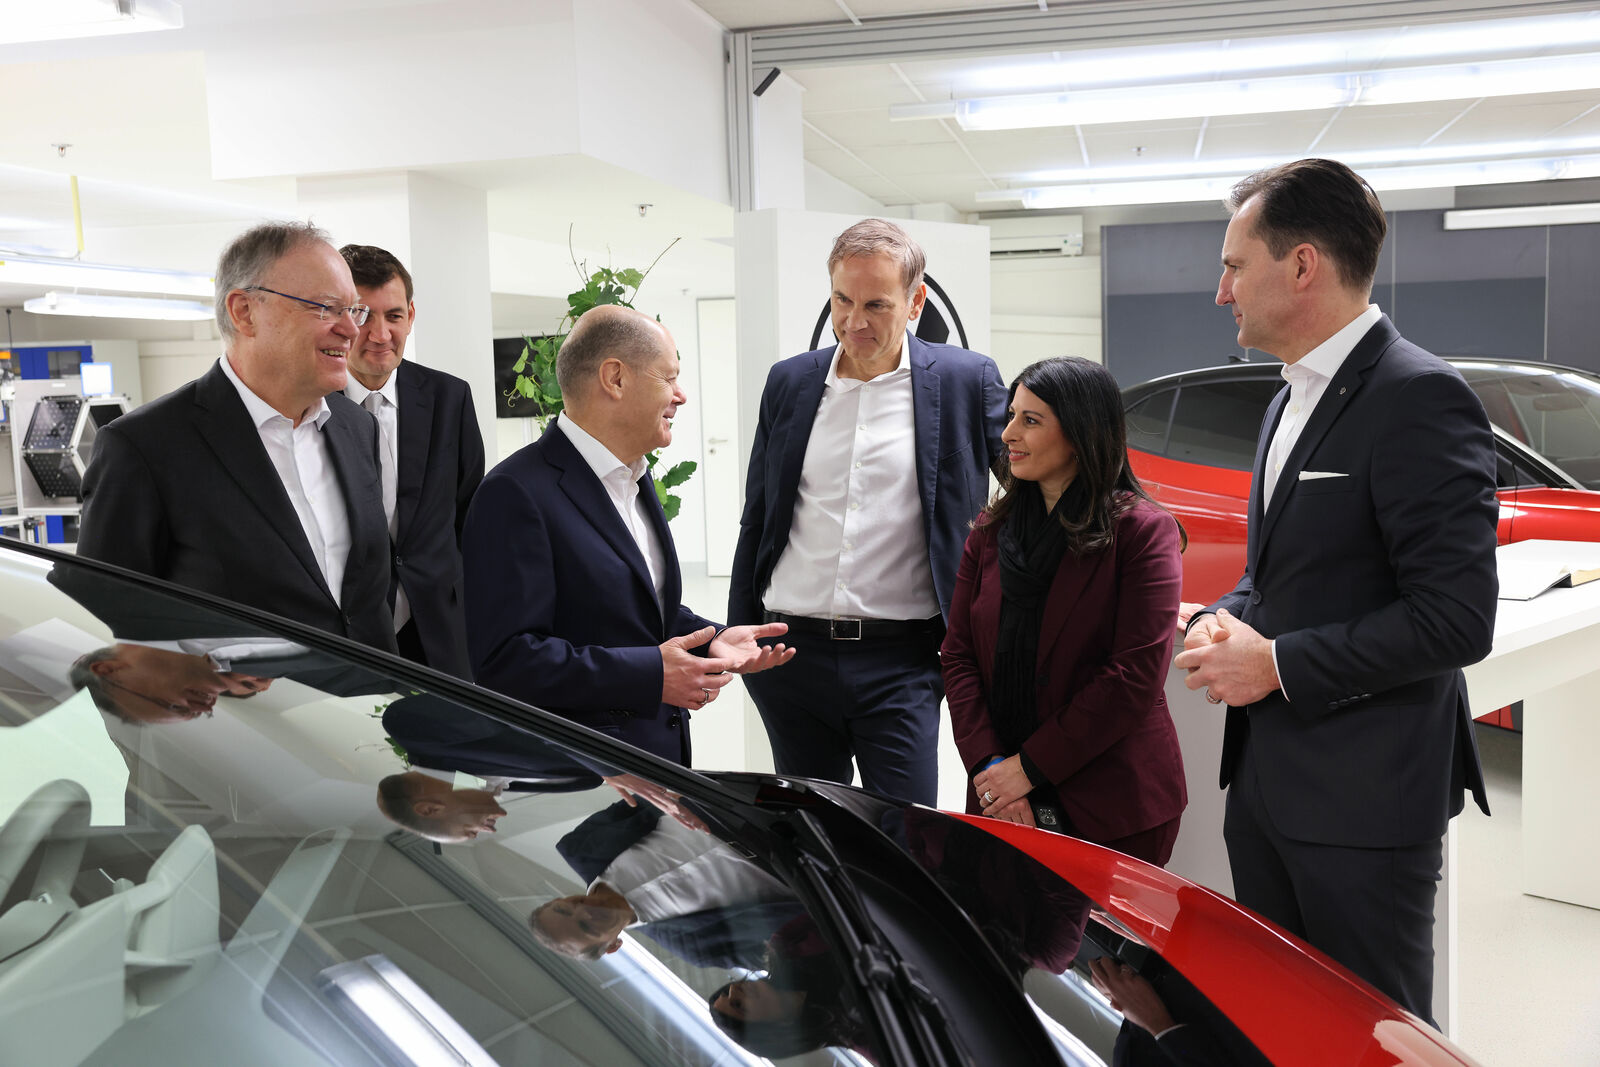 German Chancellor Olaf Scholz attends his first Volkswagen works meeting